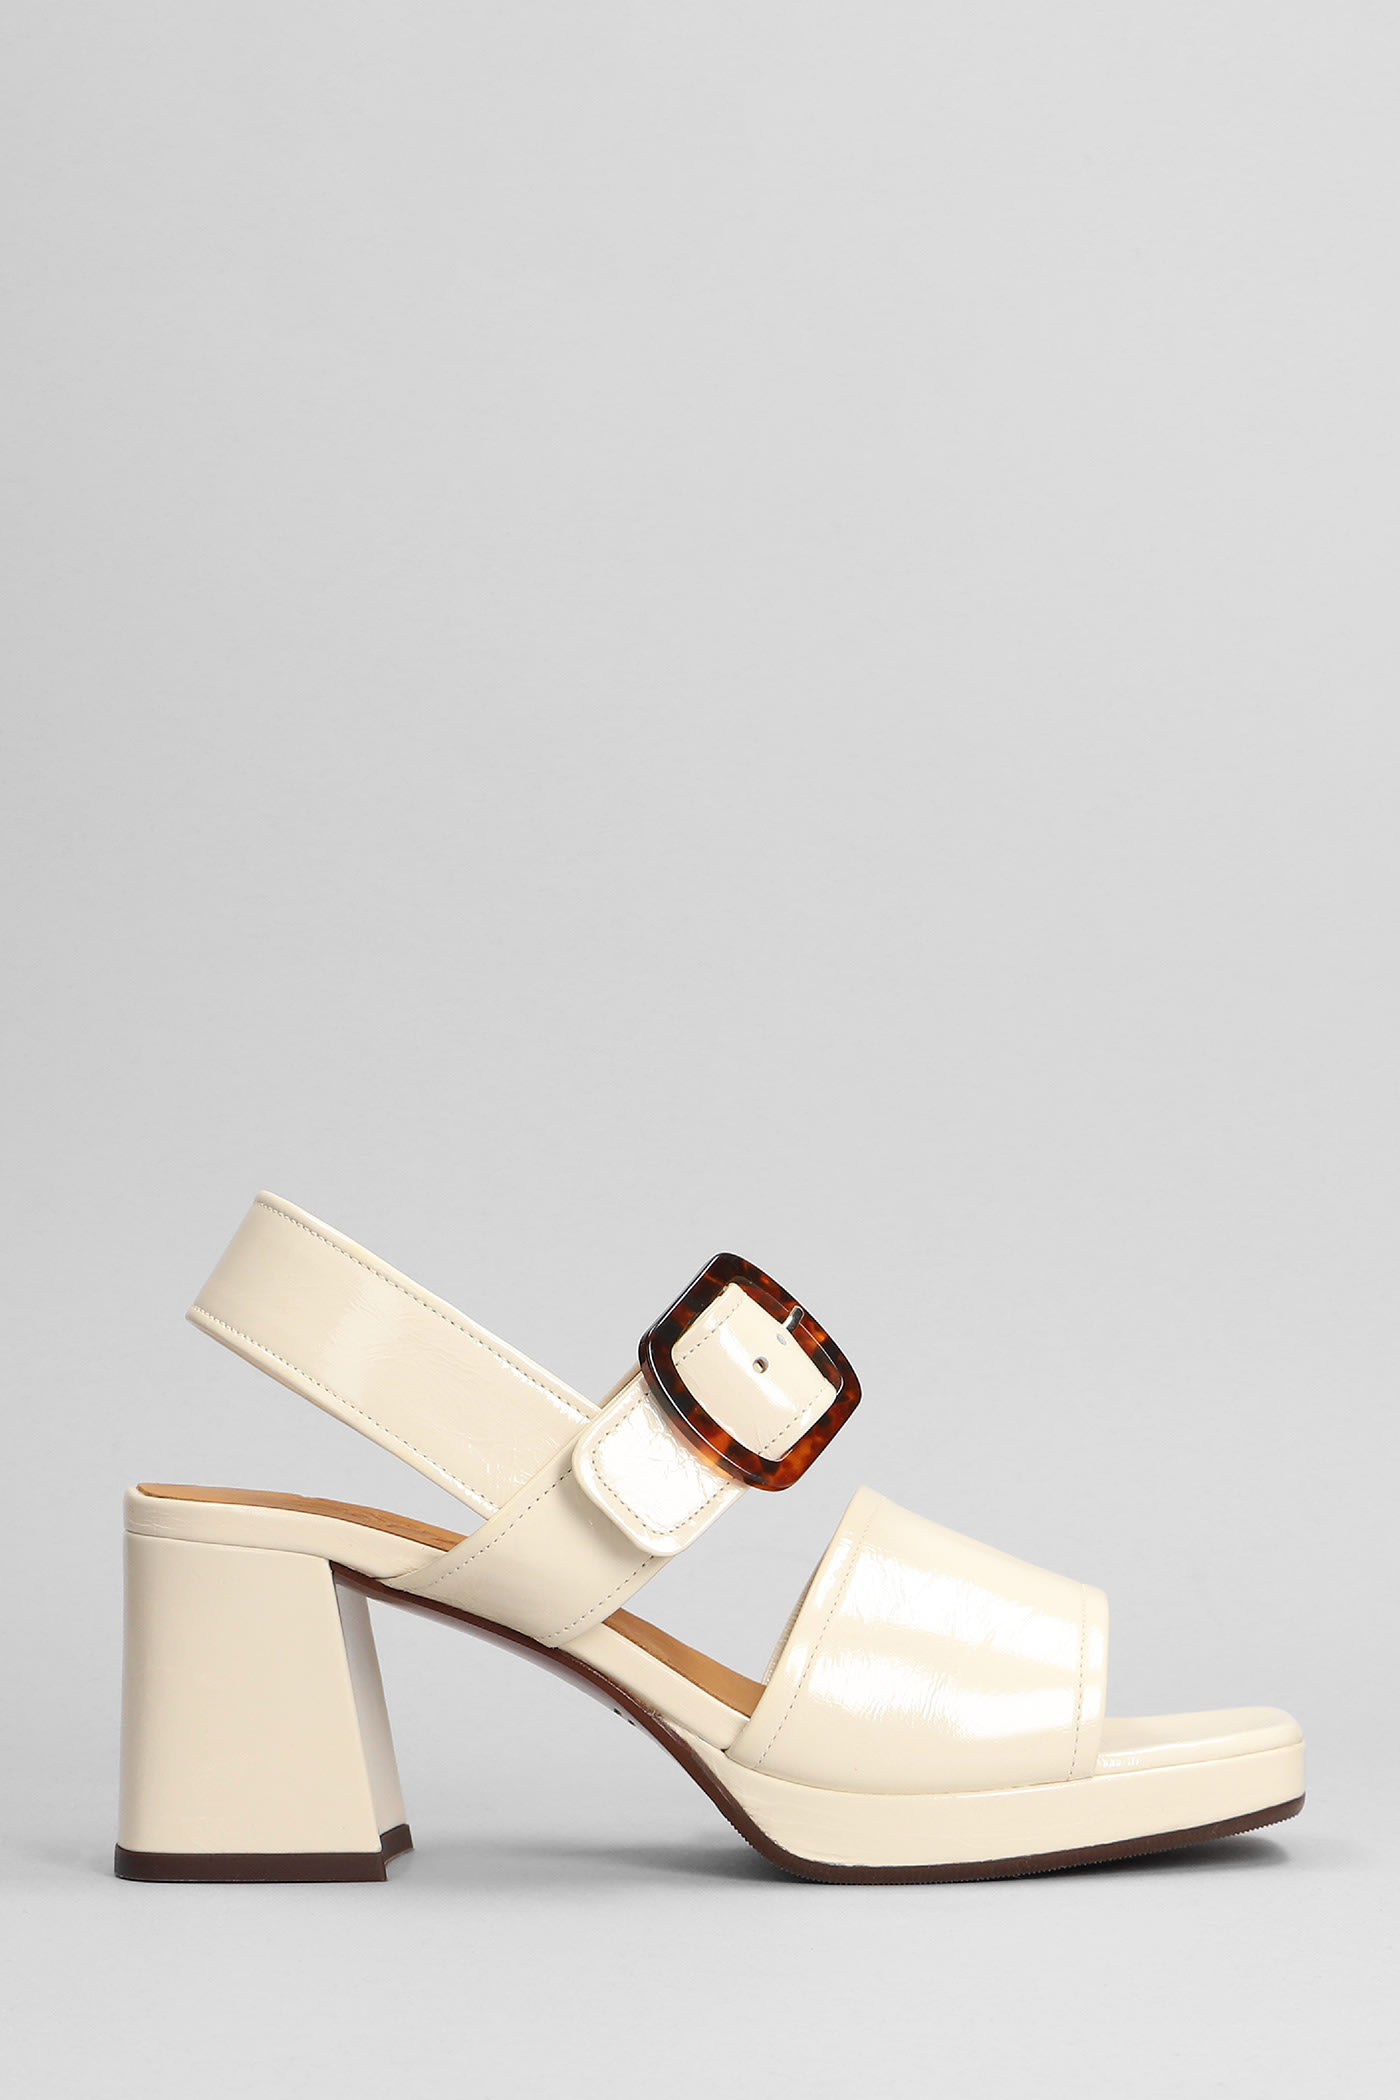 Chie Mihara Ginka 42 Sandals In Beige Leather